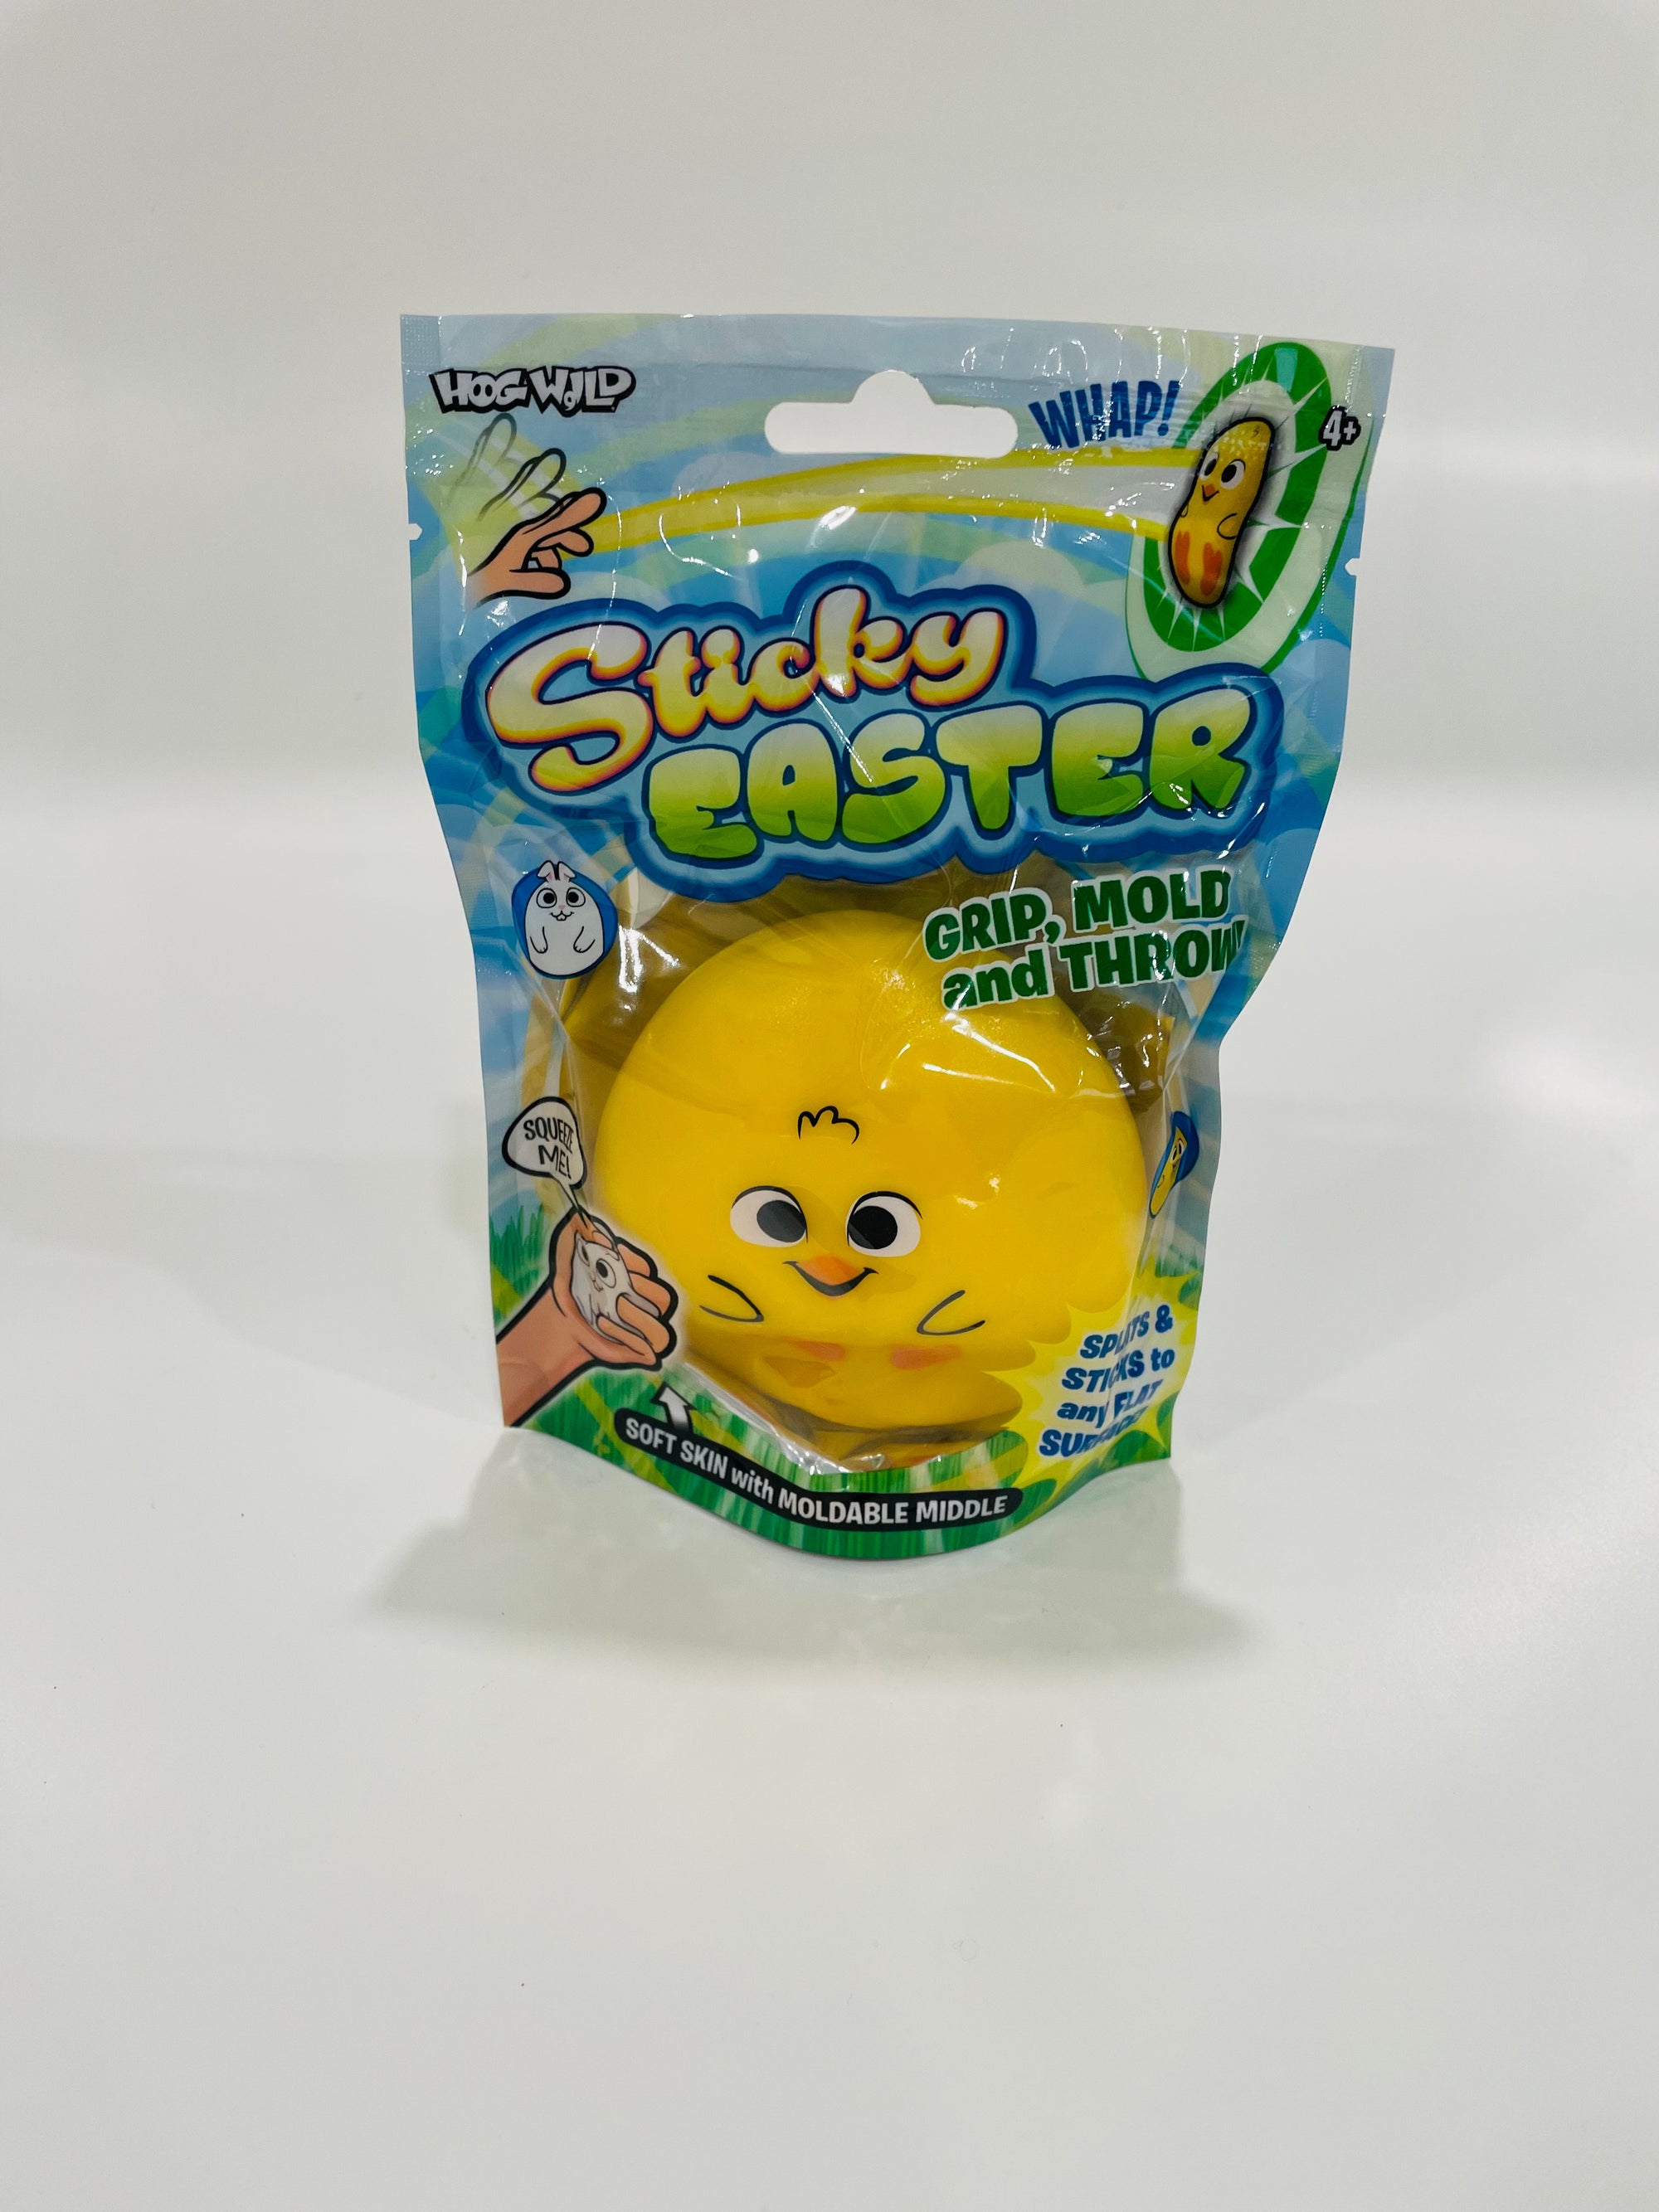 Sticky Easter Squish & Throw - Assorted